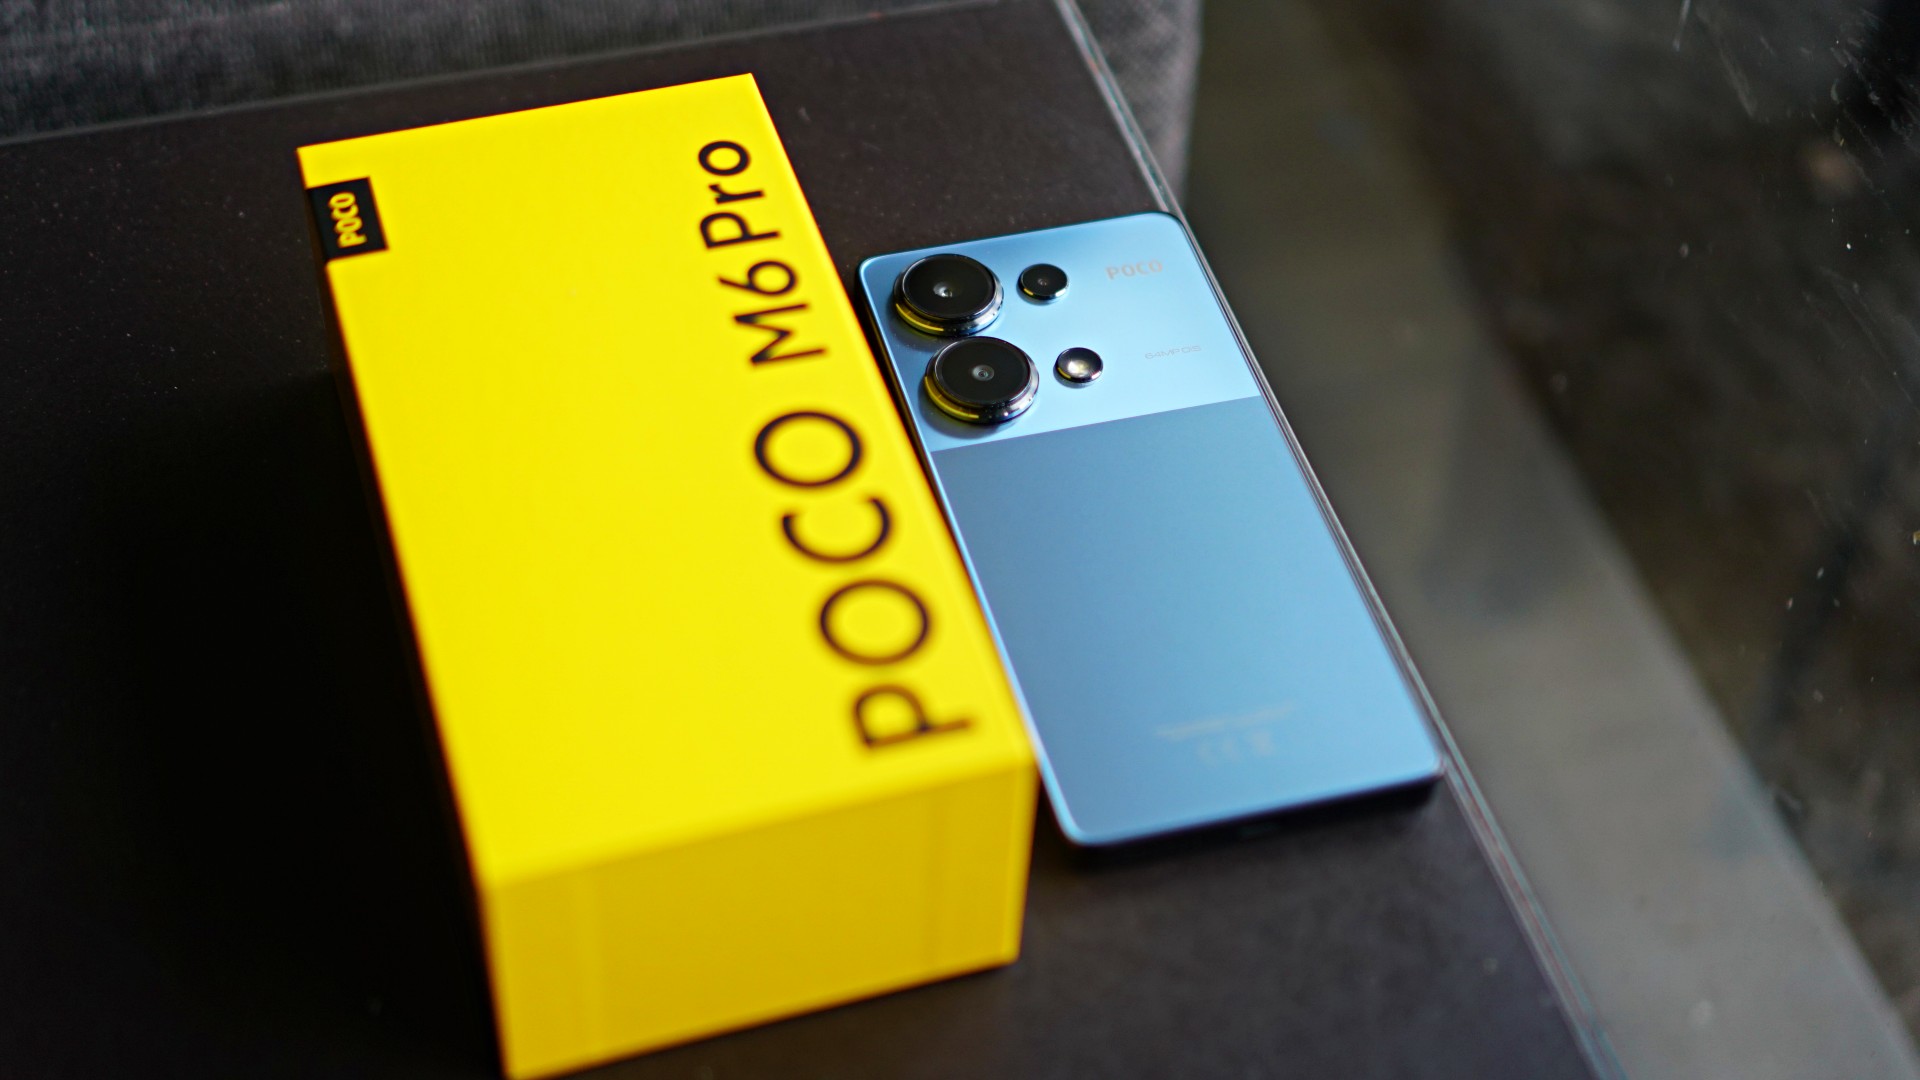 Poco M6 Pro Unboxing & Quick Review: The Ultimate 5G Budget Smartphone! 